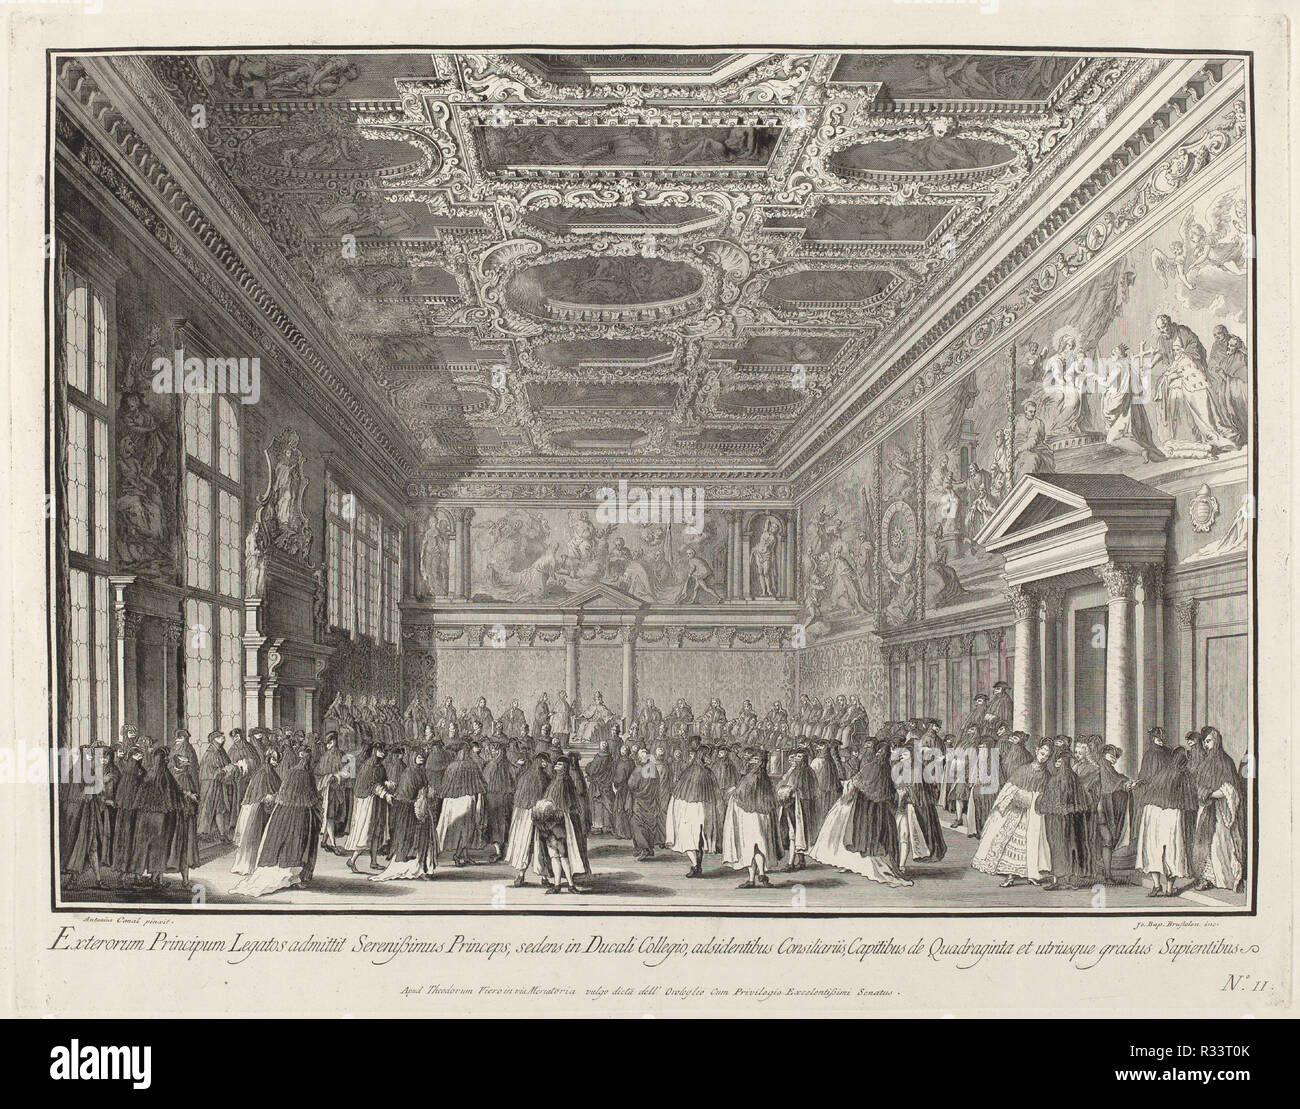 Reception by the Doge of Foreign Ambassadors in the Sala del Collegio. Dated: 1763/1766. Dimensions: plate: 44.8 x 57.4 cm (17 5/8 x 22 5/8 in.)  sheet: 50.3 x 67.4 cm (19 13/16 x 26 9/16 in.). Medium: etching and engraving on laid paper. Museum: National Gallery of Art, Washington DC. Author: Giovanni Battista Brustolon after Canaletto. Stock Photo